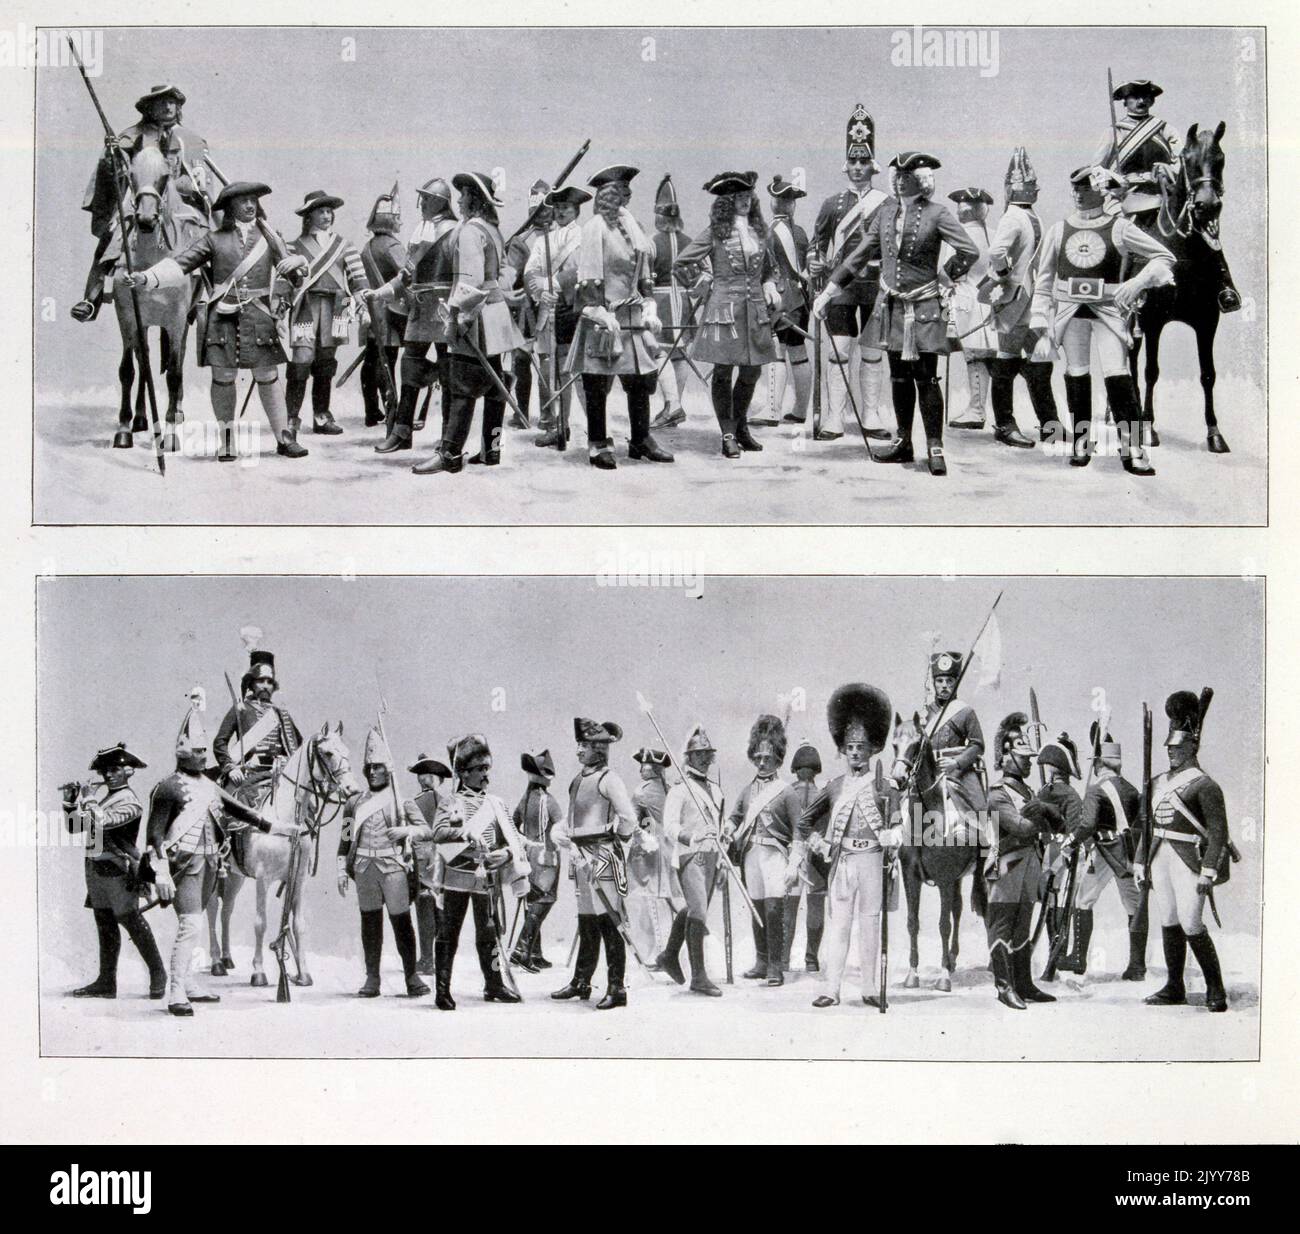 Exposition Universelle (World Fair) Paris, 1900; black and white split image showing a display of men in military uniforms at the exhibit of the history of the German military. The uniforms are from 1680 to 1807. Stock Photo